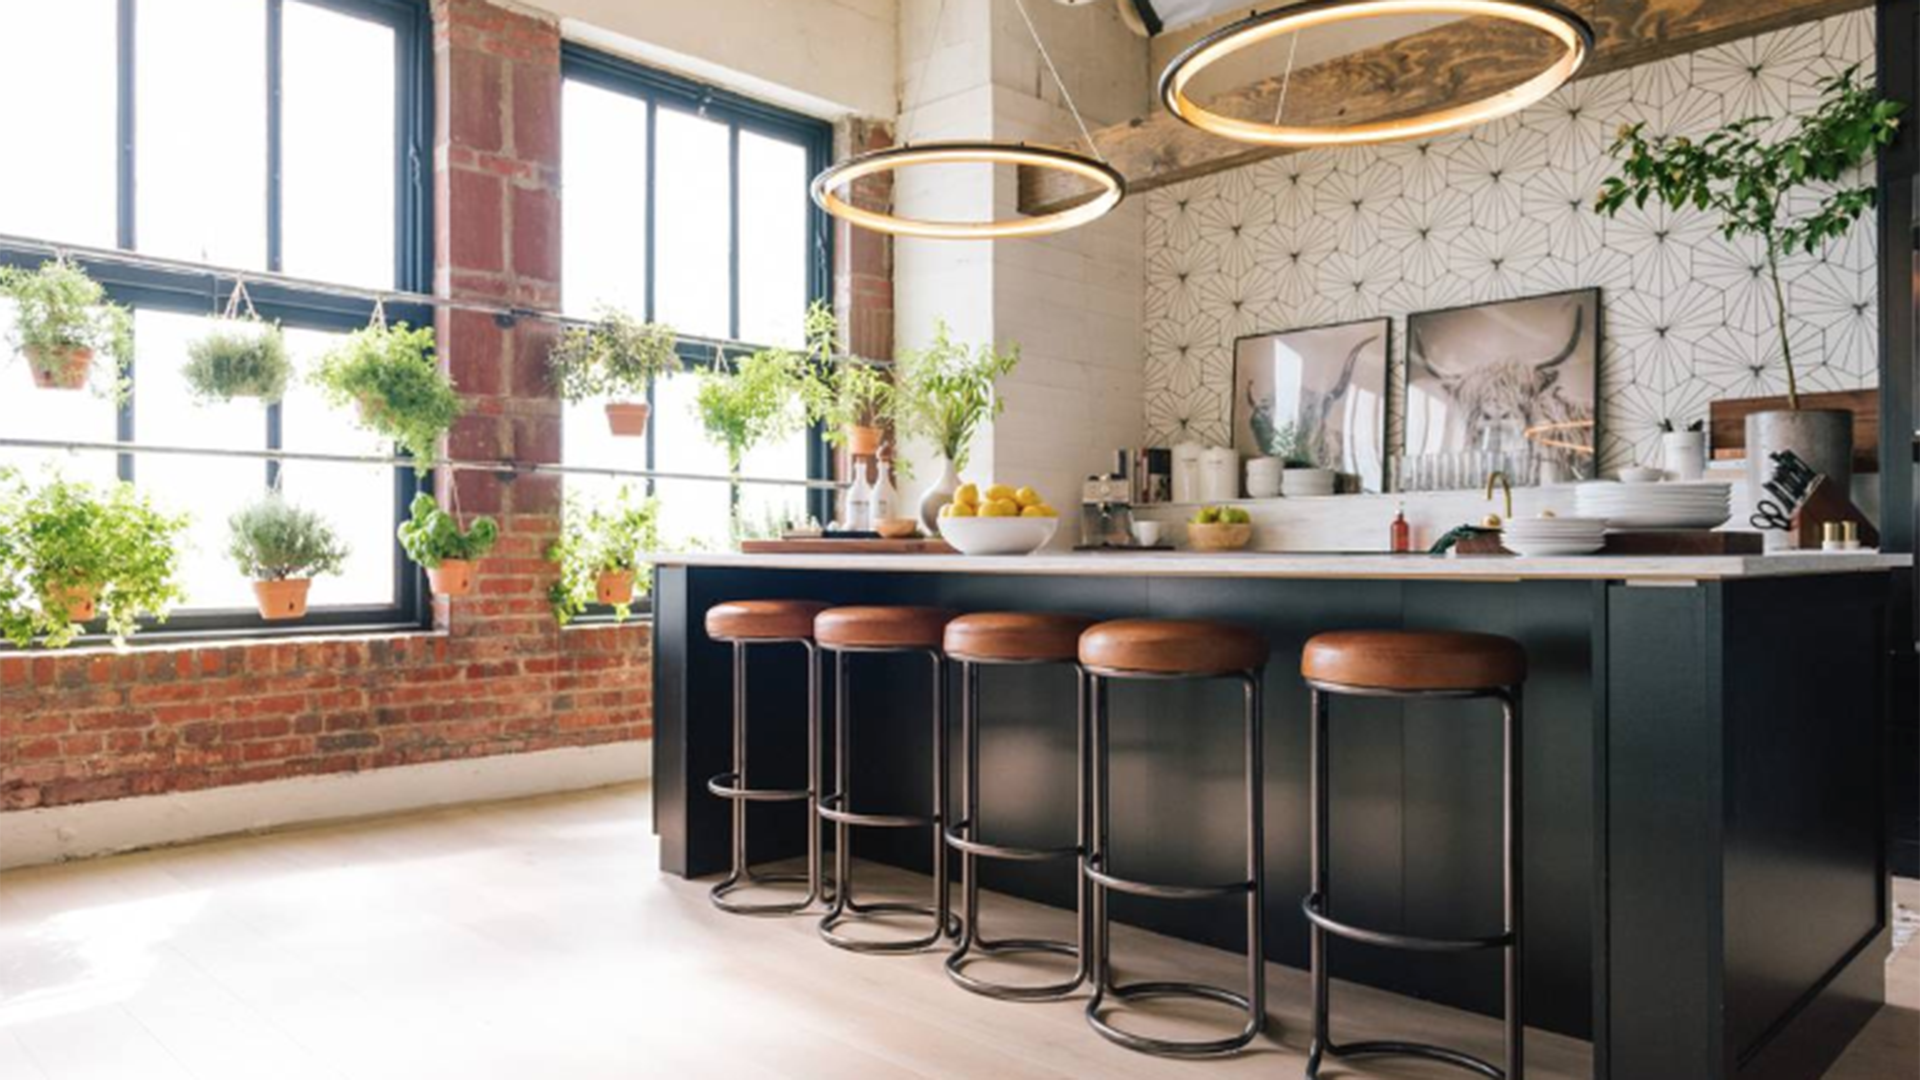 The loft residence of the cast of Netflix's Queer Eye makeover show features tall windows, natural light, and sleek decor including leather bar stools and circular lights above the kitchen counter. 